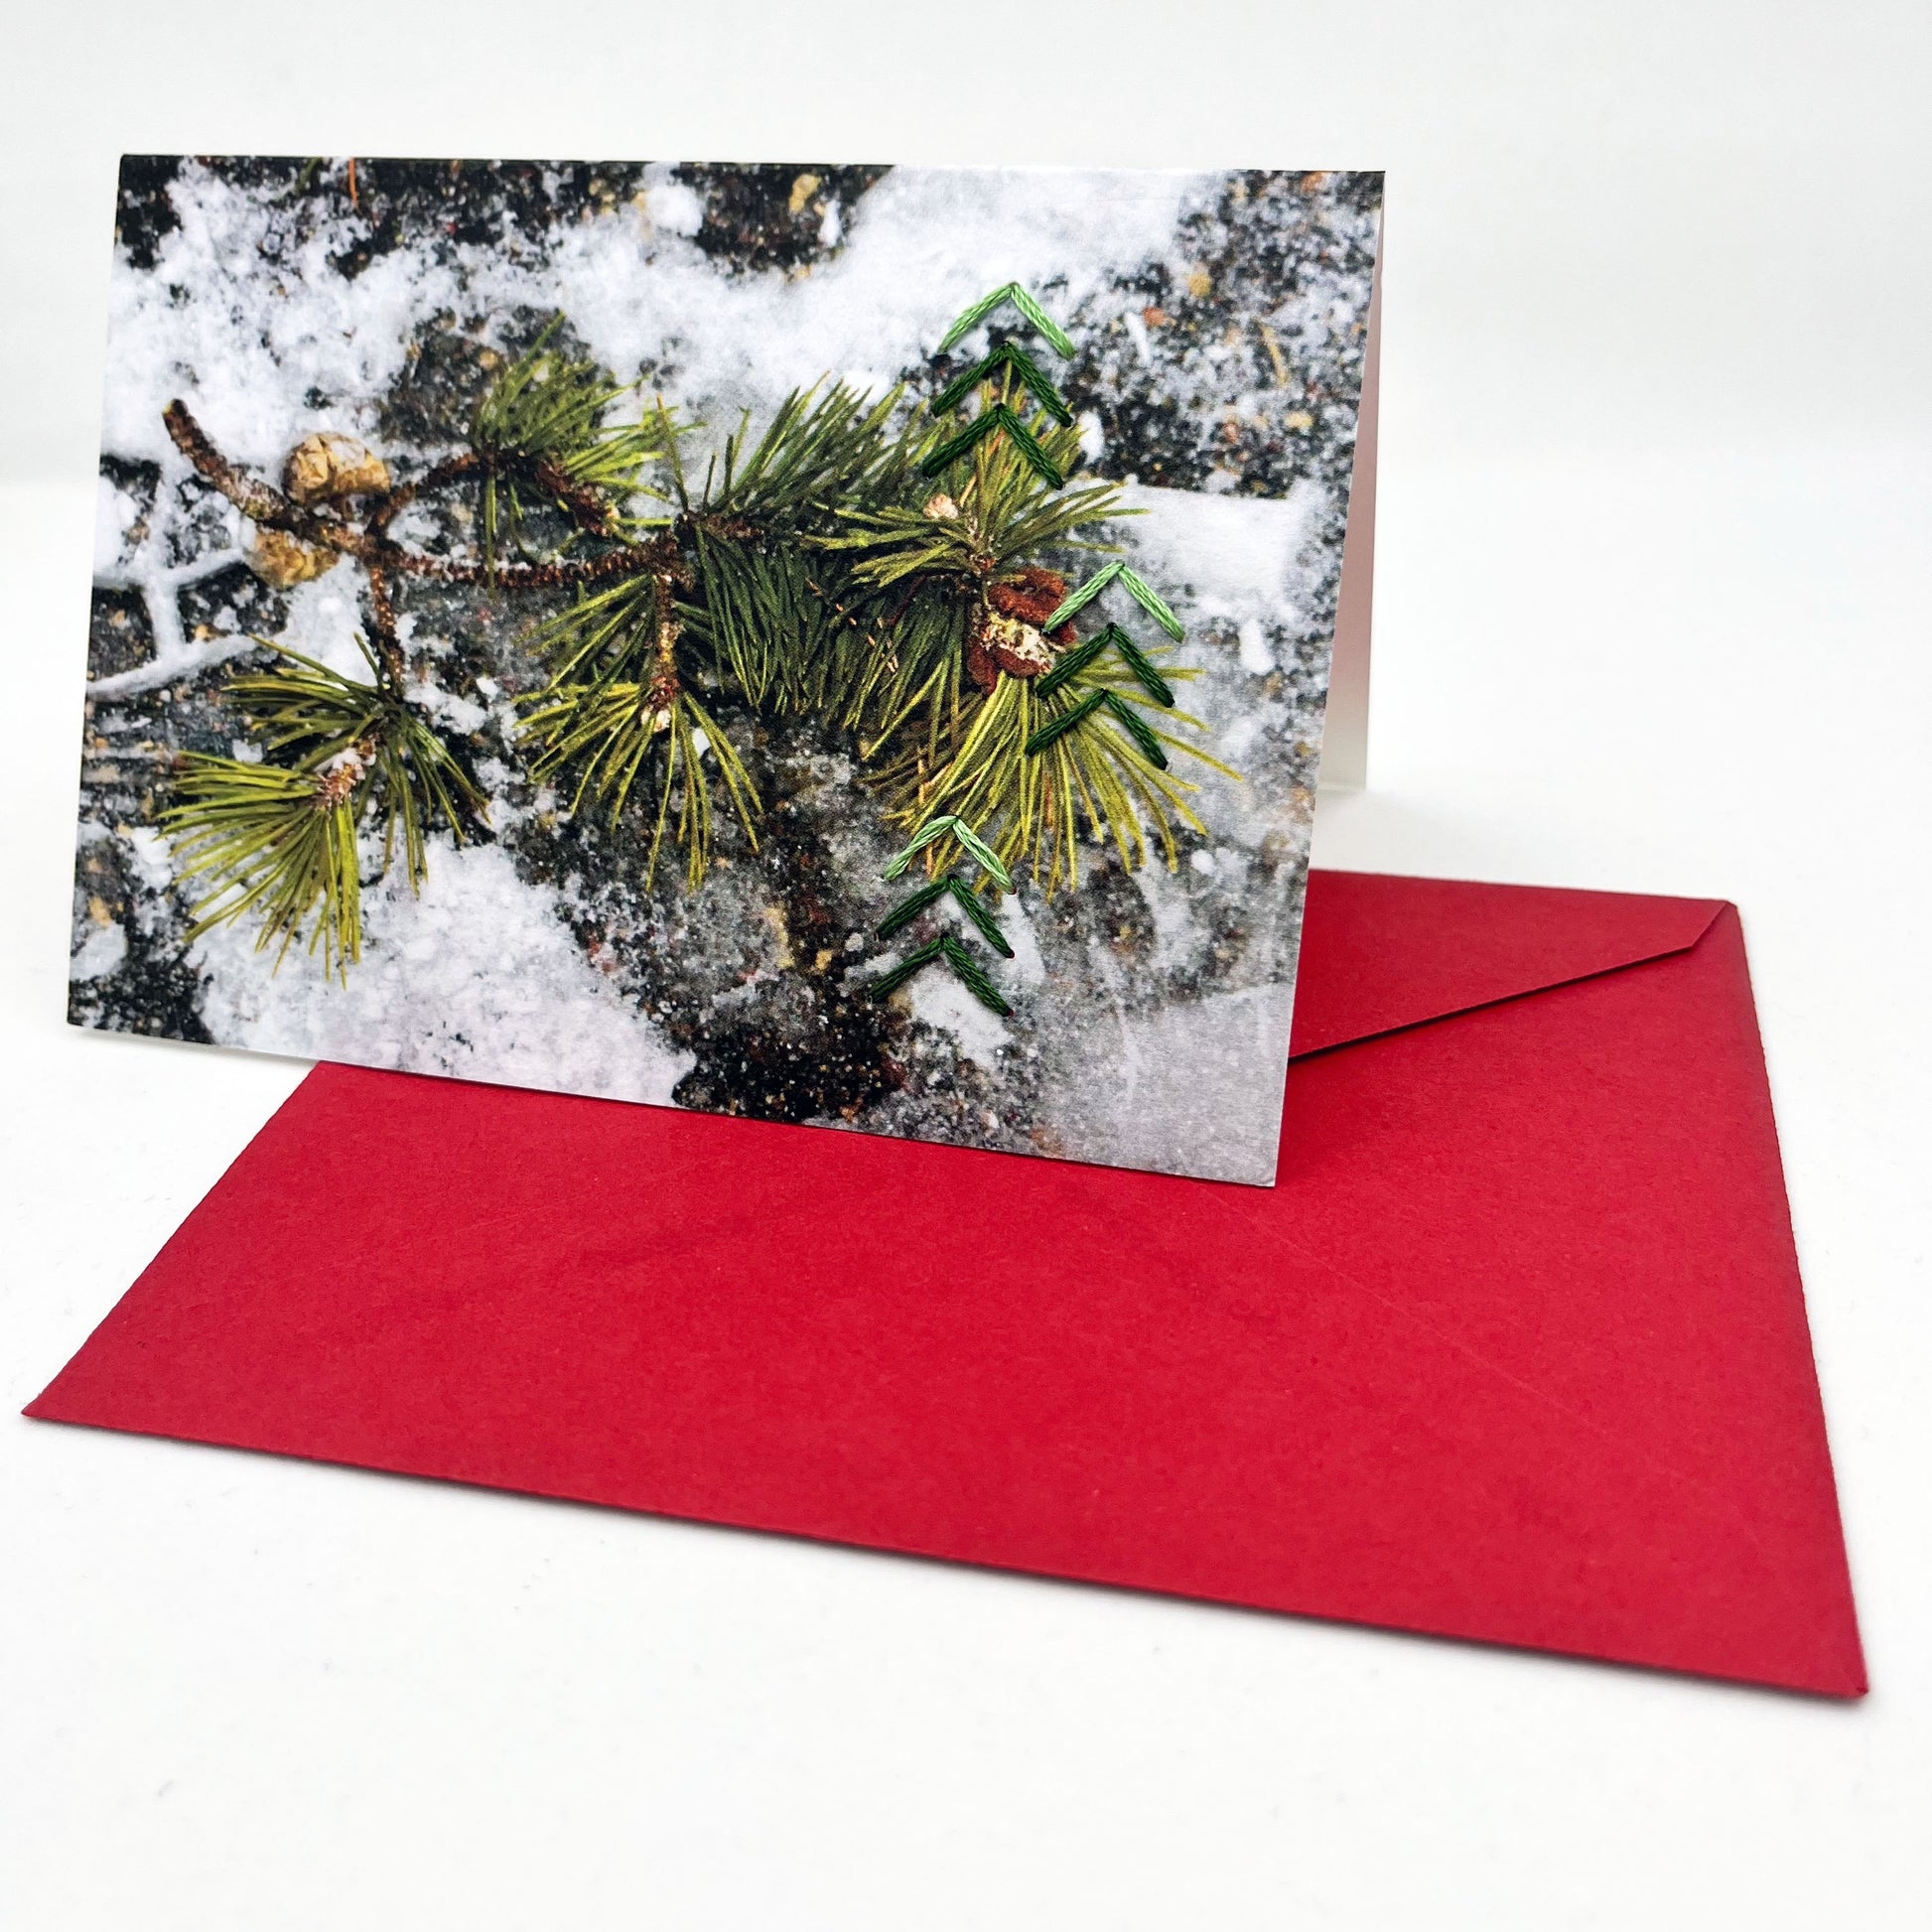 Greeting card standing upright on an envelope. Photo of pine tree branch in snow. Green stitches of groups of 3 chevrons to create abstract pine tree shape